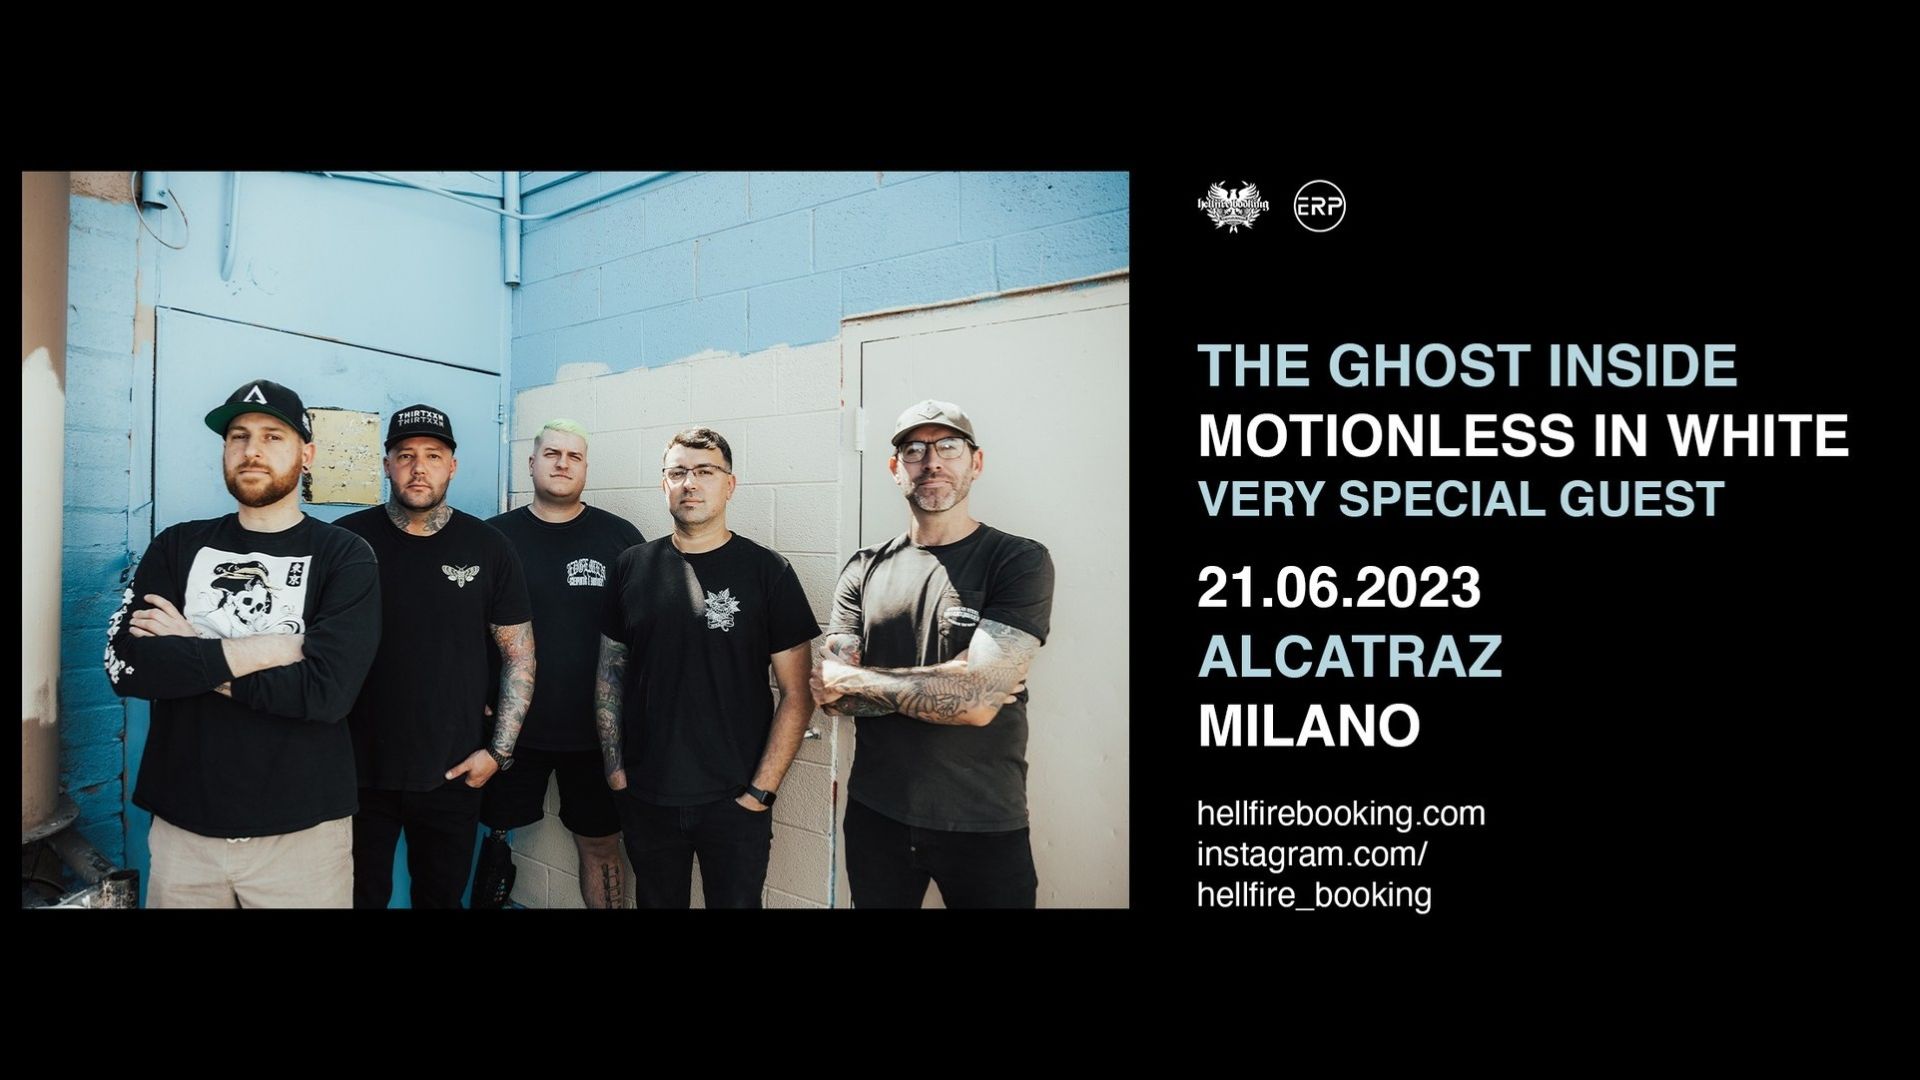 The Ghost Inside, Motionless In White e very special guest